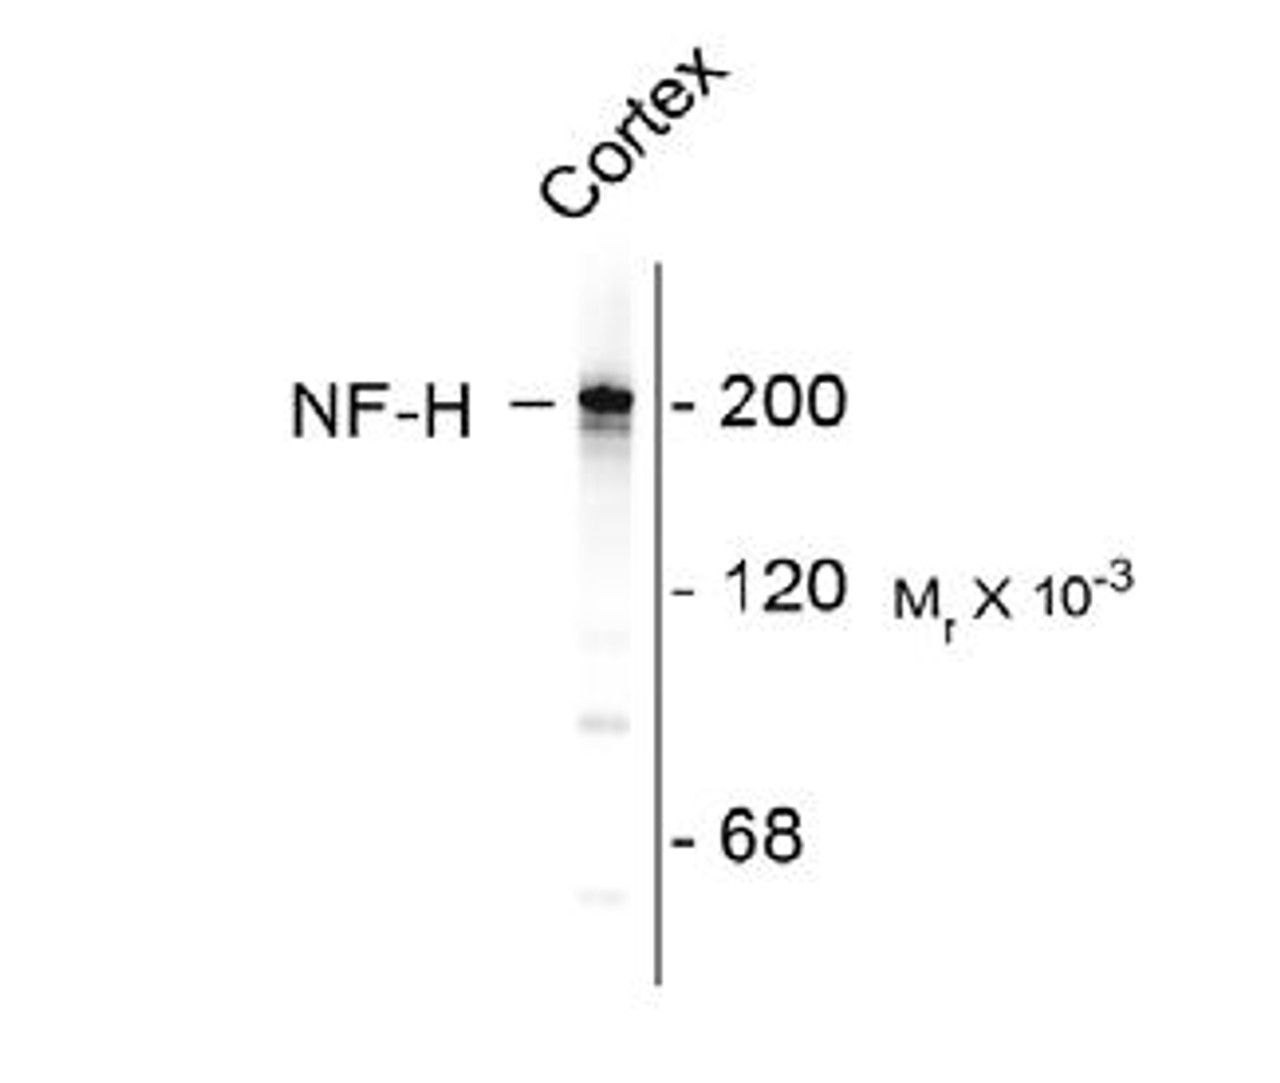 Western blot of rat cortex lysate showing specific immunolableing of the ~ 200k NF-H protein.